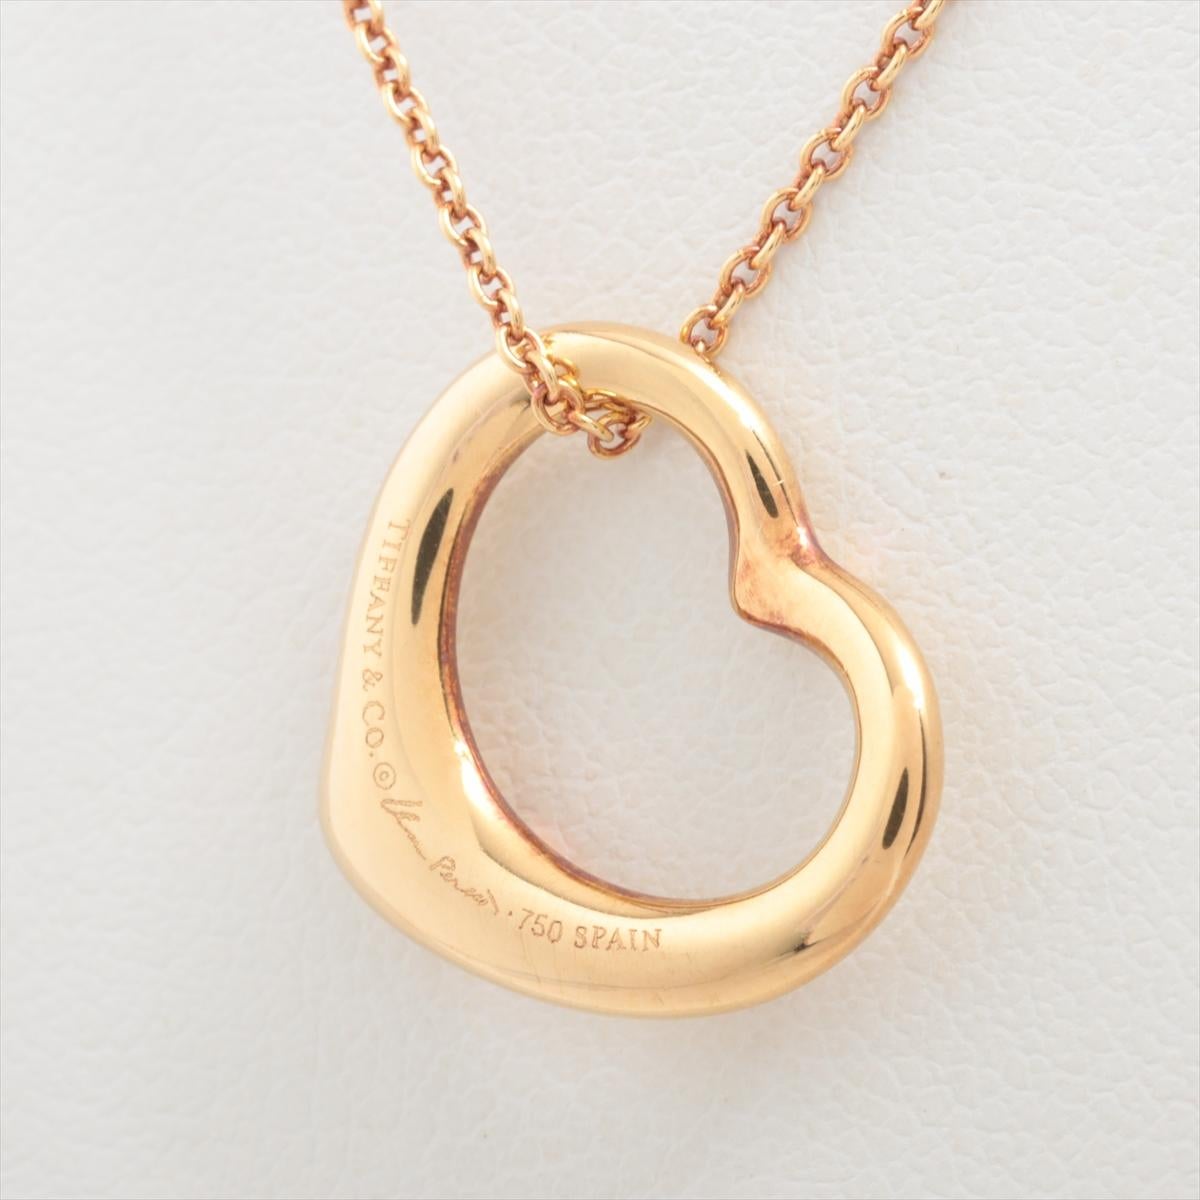 Tiffany Open Heart Necklace  In Excellent Condition For Sale In Oyster Bay, NY